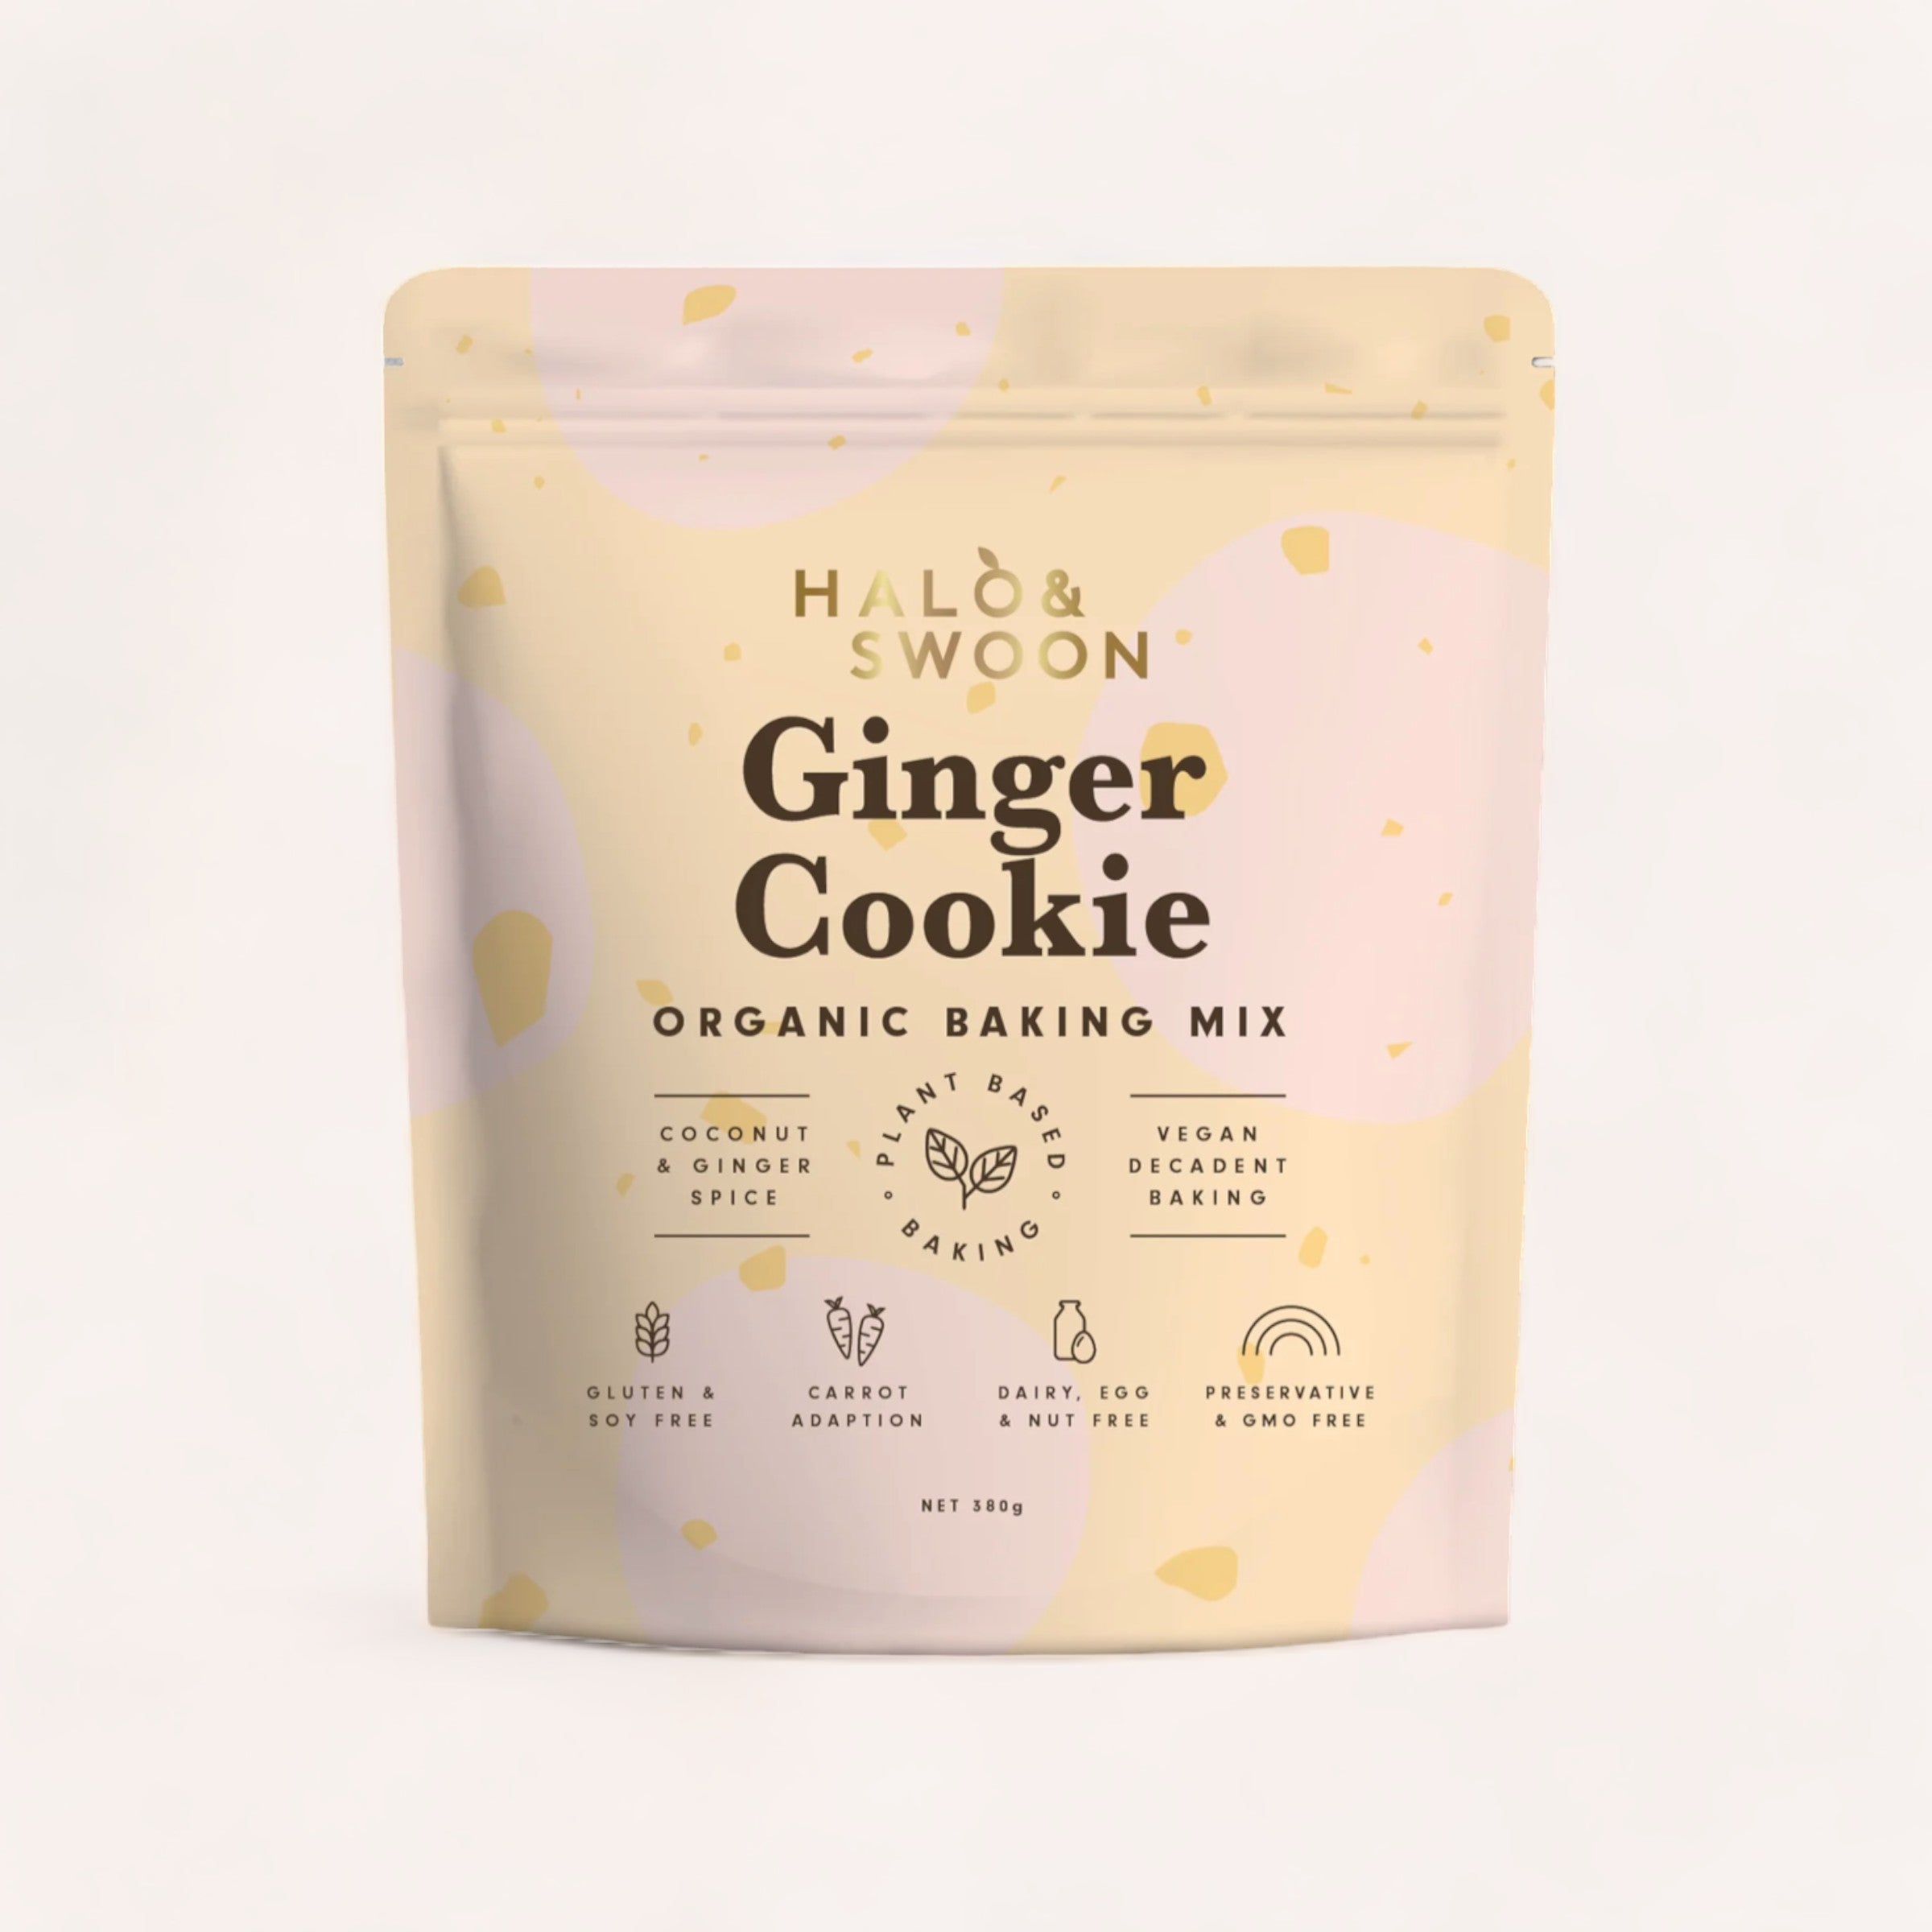 A package of Ginger Cookie Mix by Halo & Swoon organic baking mix with a pastel design indicating it is a coconut ginger spice flavor, vegan, gluten-free, dairy-free, and made without preservatives.